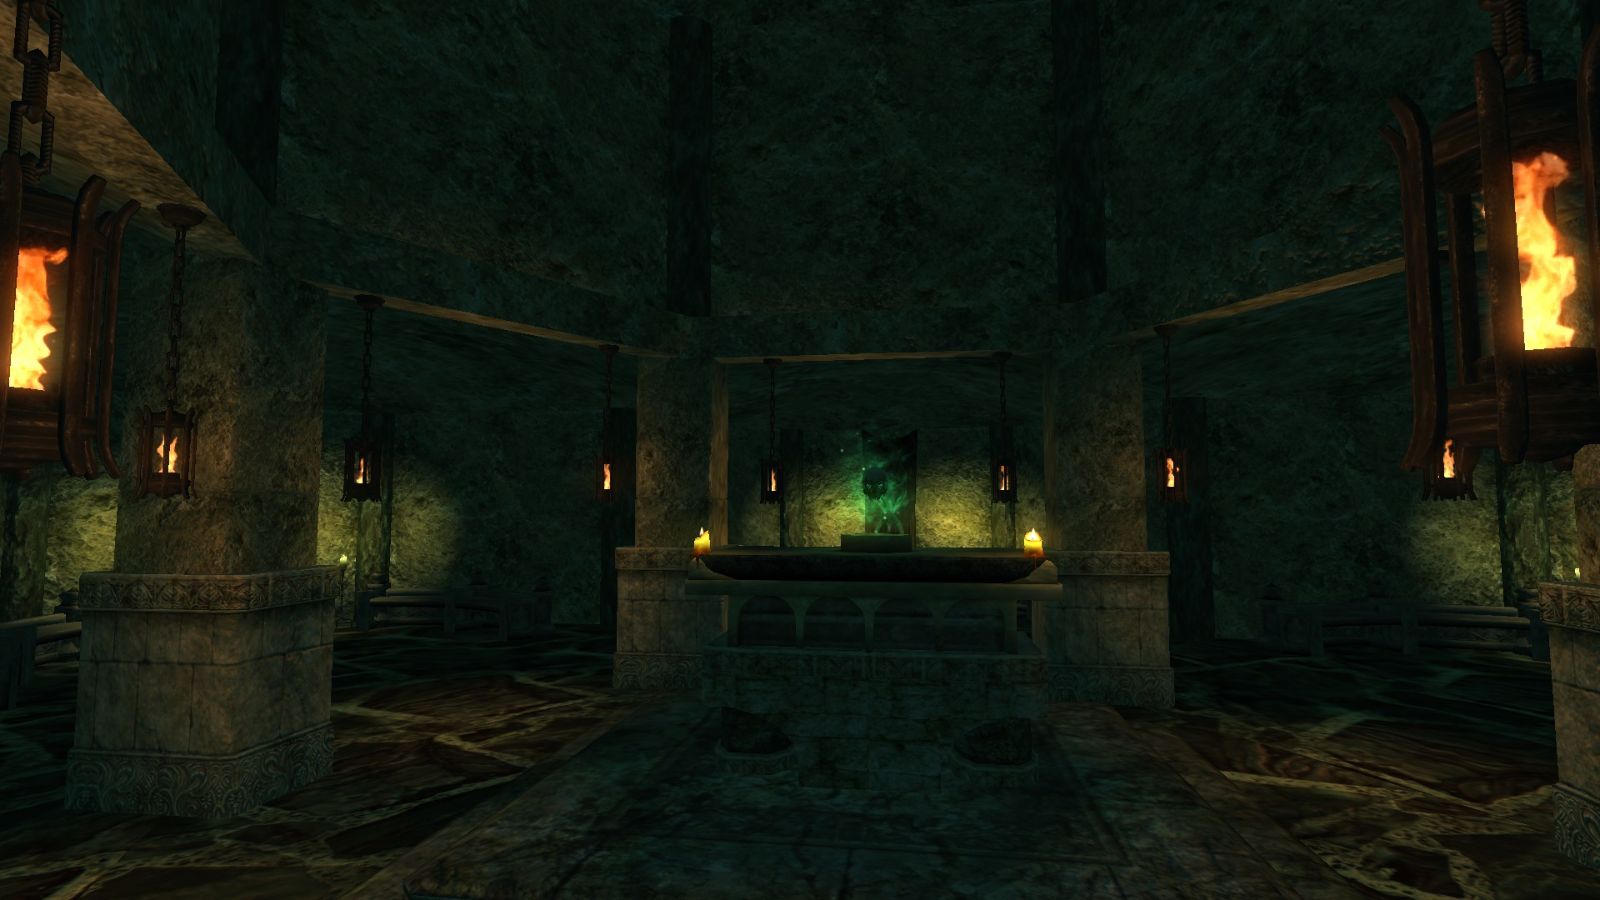 Sanctuary – altar room with Sacred Skull (the skull is inspired by the Skull of Gul’Dan from World of Warcraft)